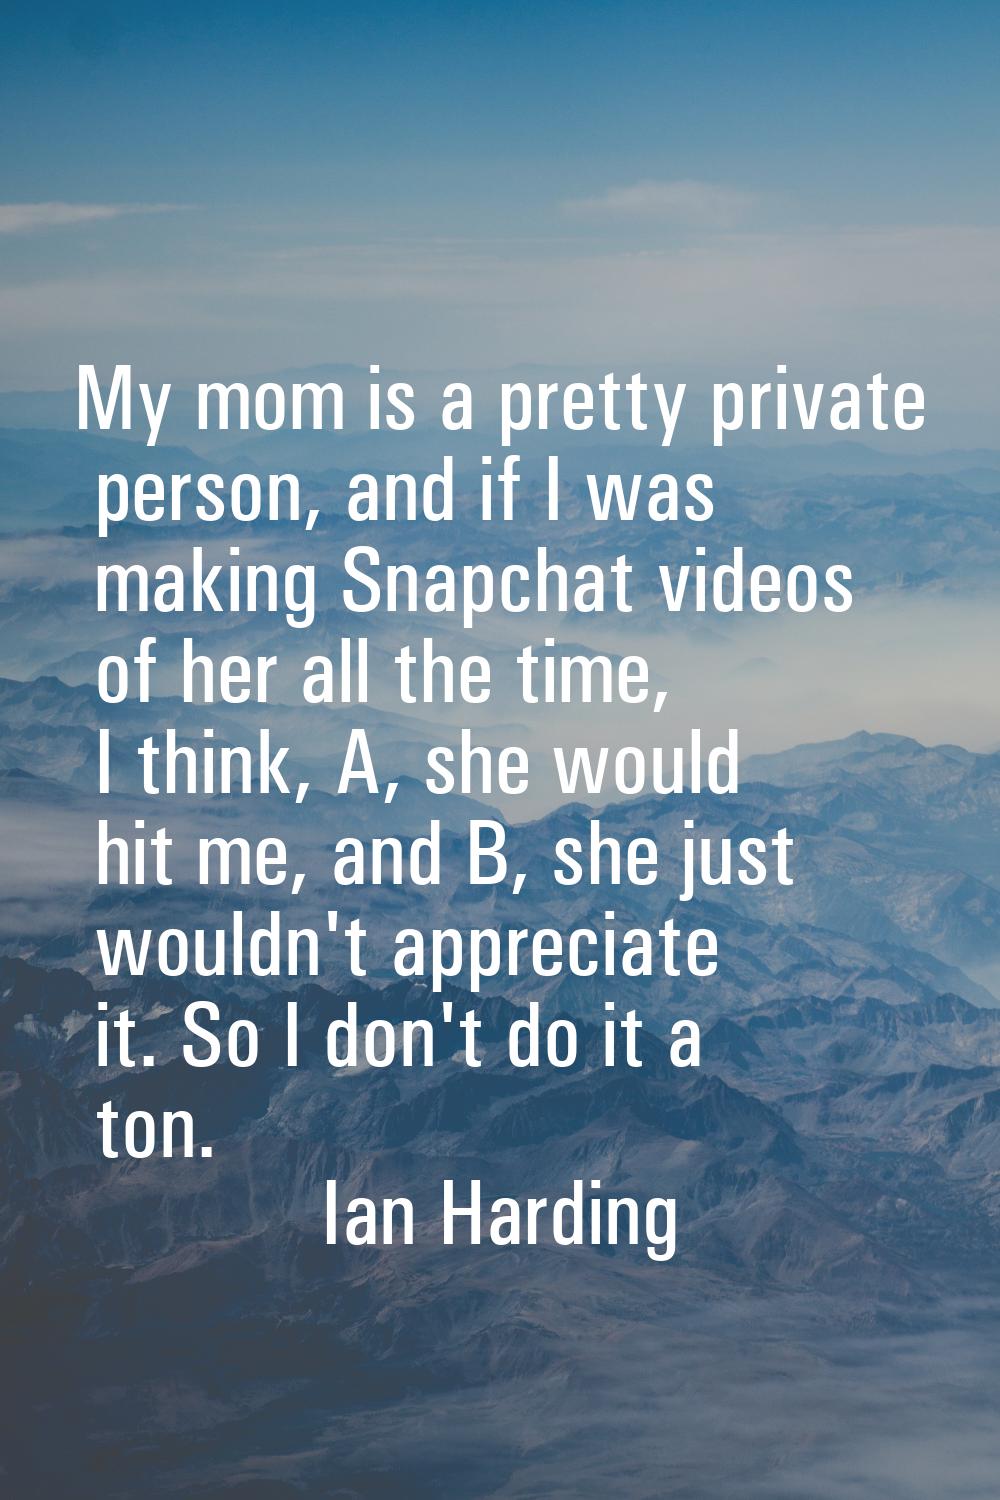 My mom is a pretty private person, and if I was making Snapchat videos of her all the time, I think